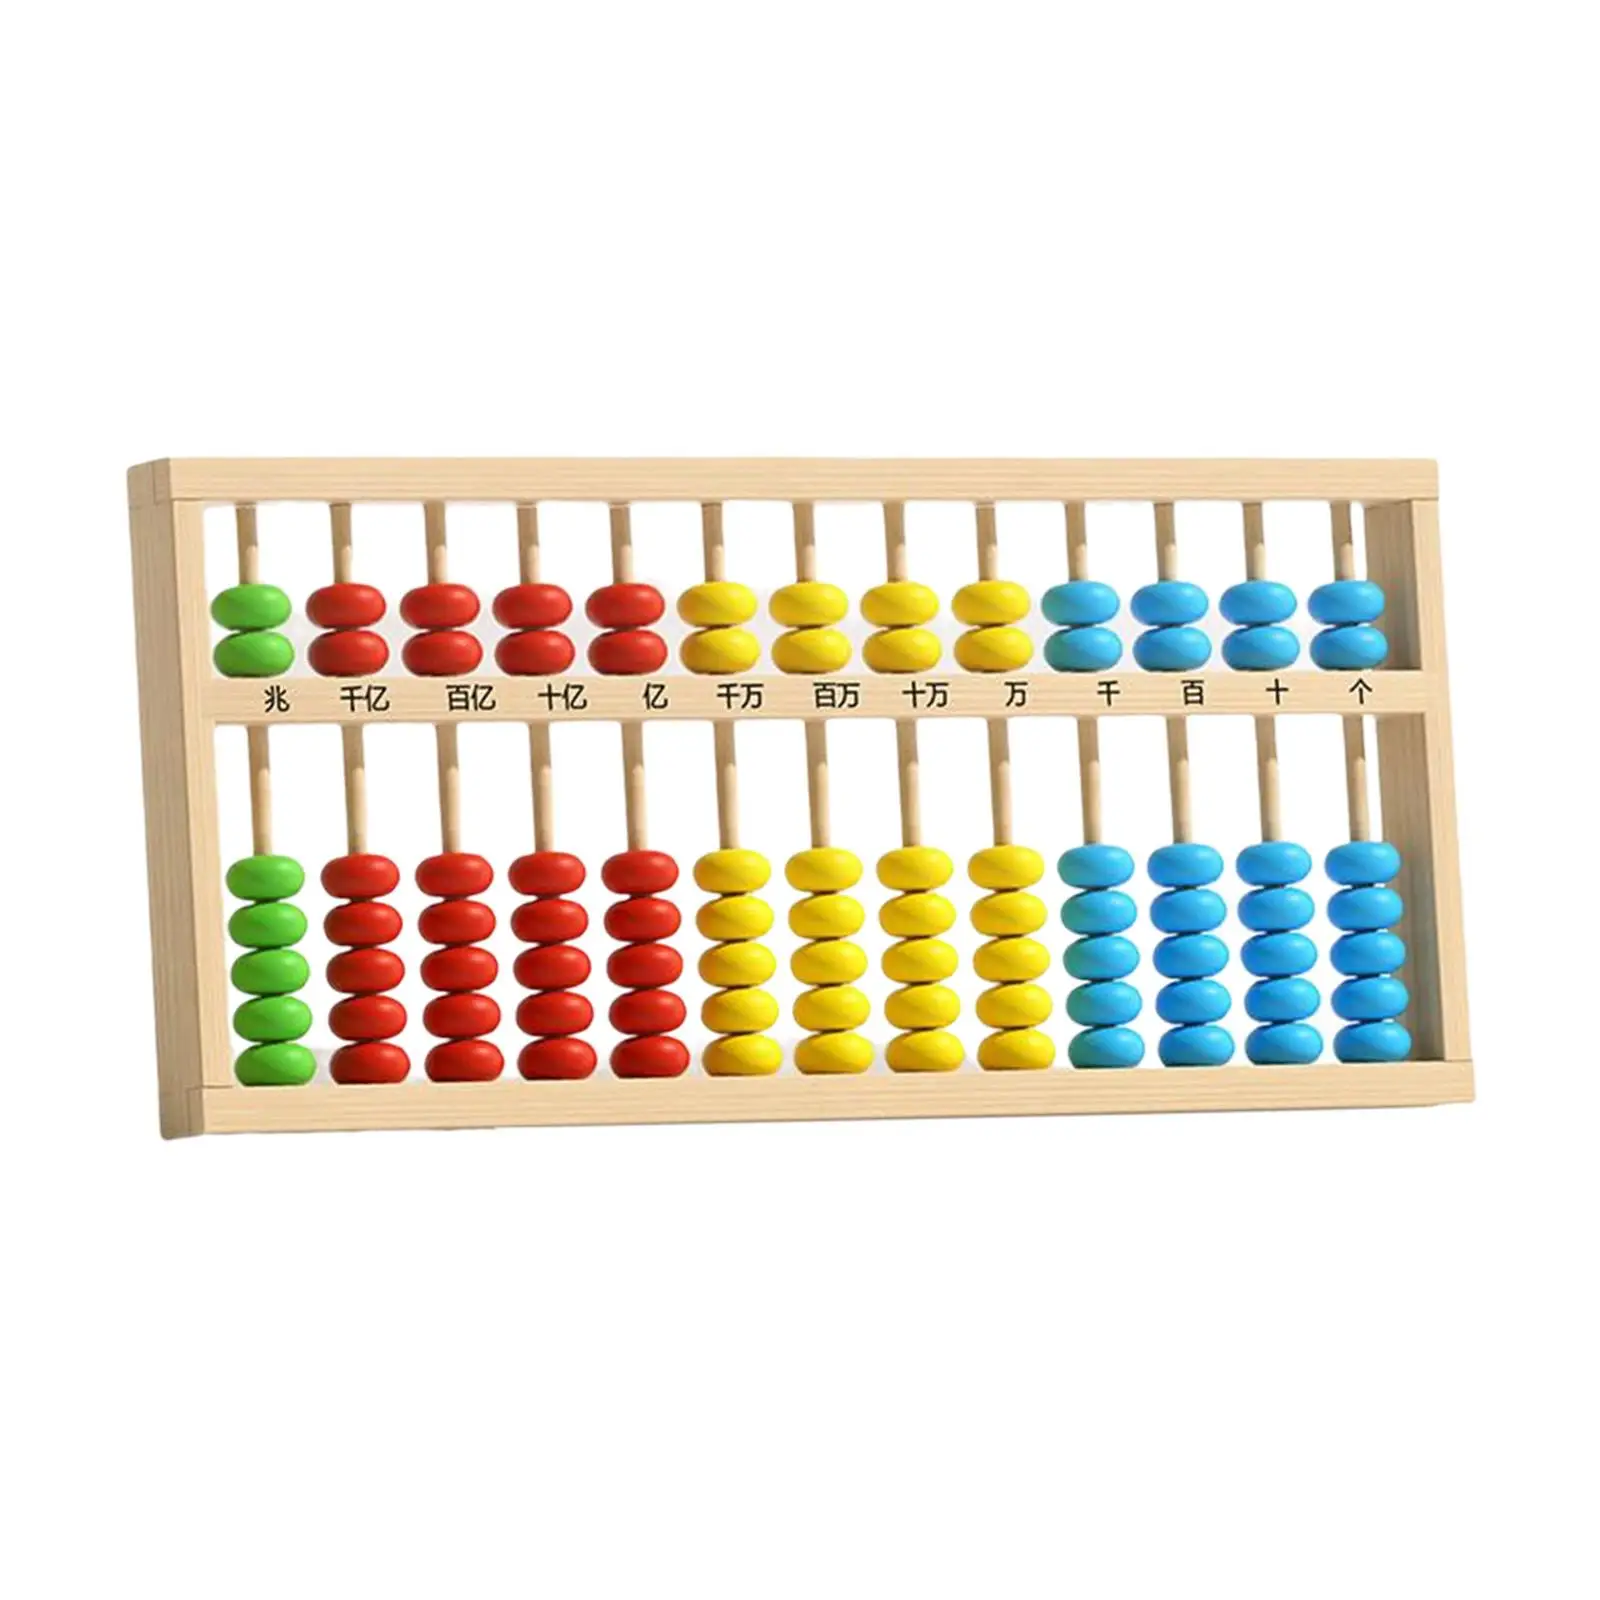 Portable Abacus Educational Toy Calculating Tool Educational Math Calculation Toys for Early Development Toddlers Boys Girls